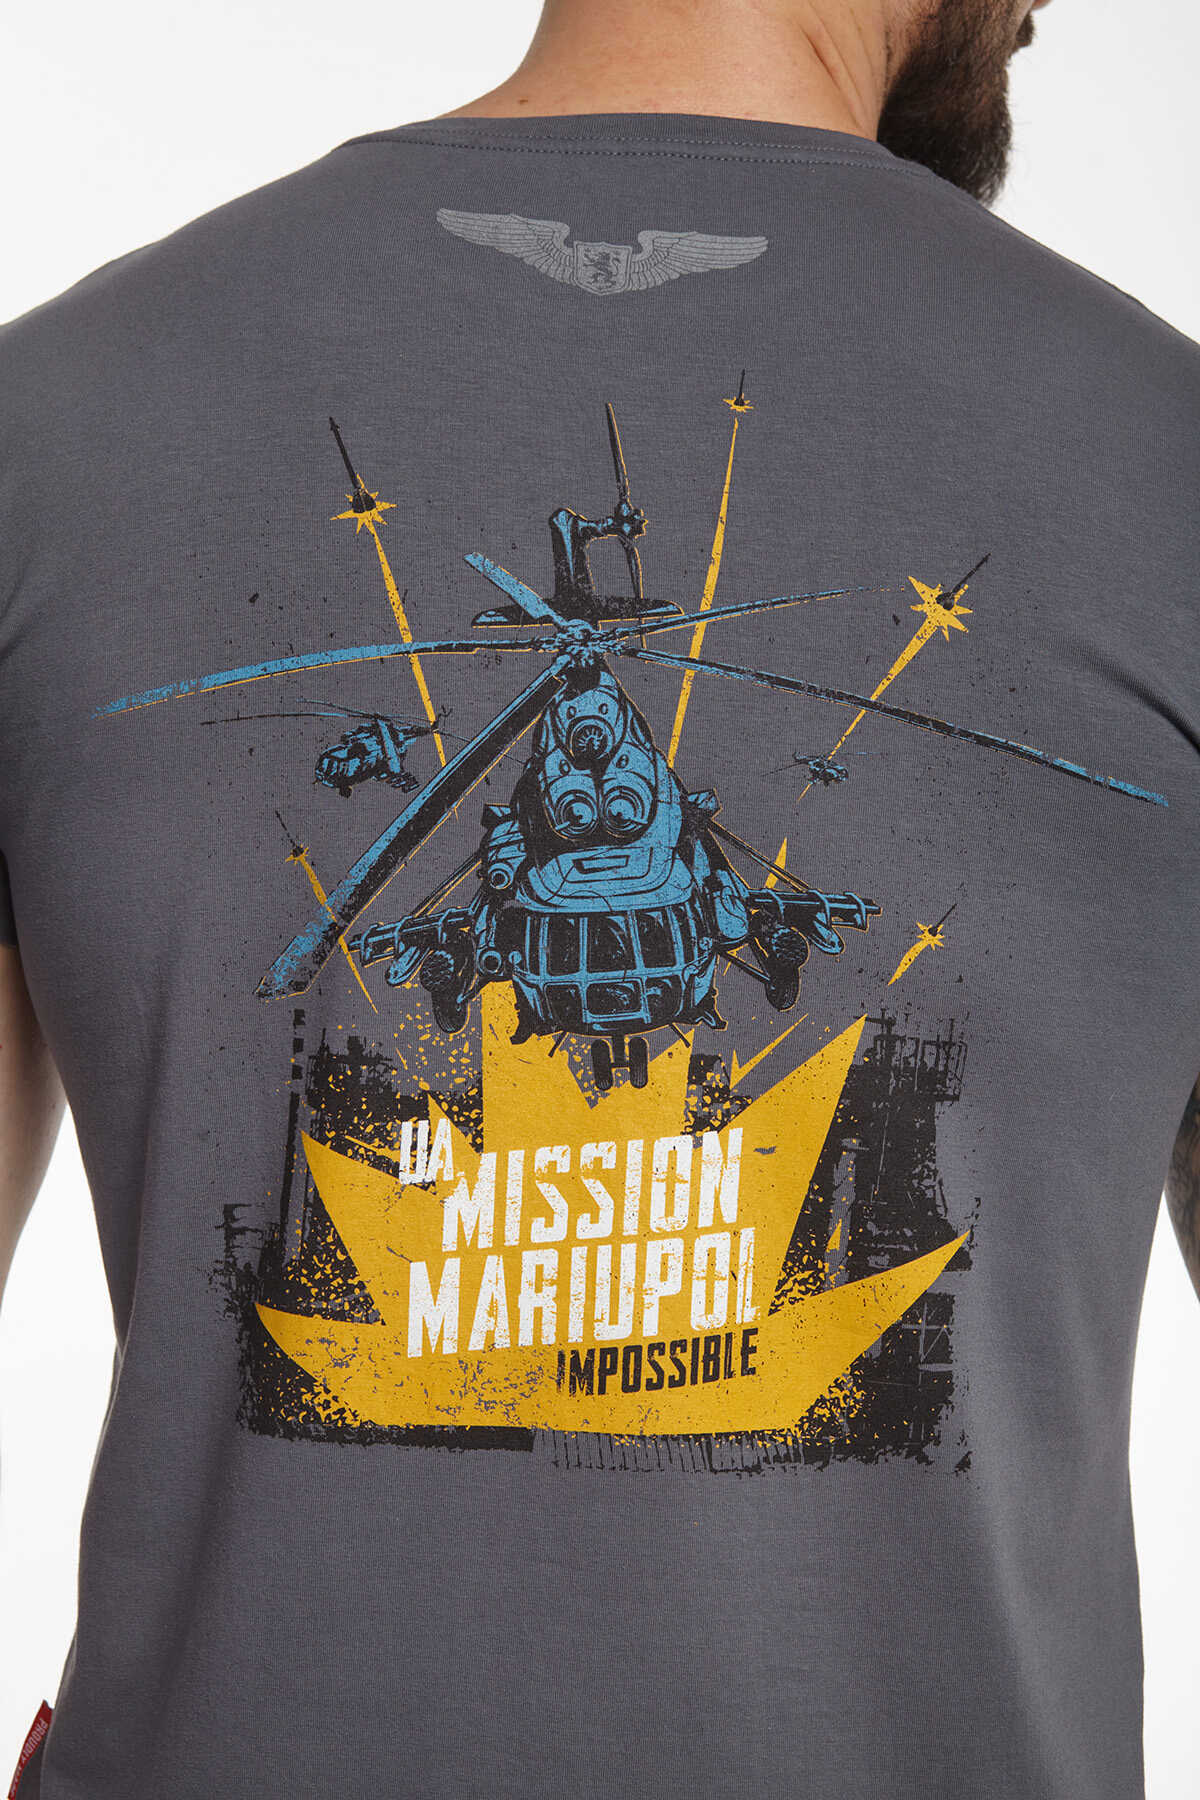 Men's T-Shirt Mission Mariupol. Color gray. 
Technique of prints applied: silkscreen printing.